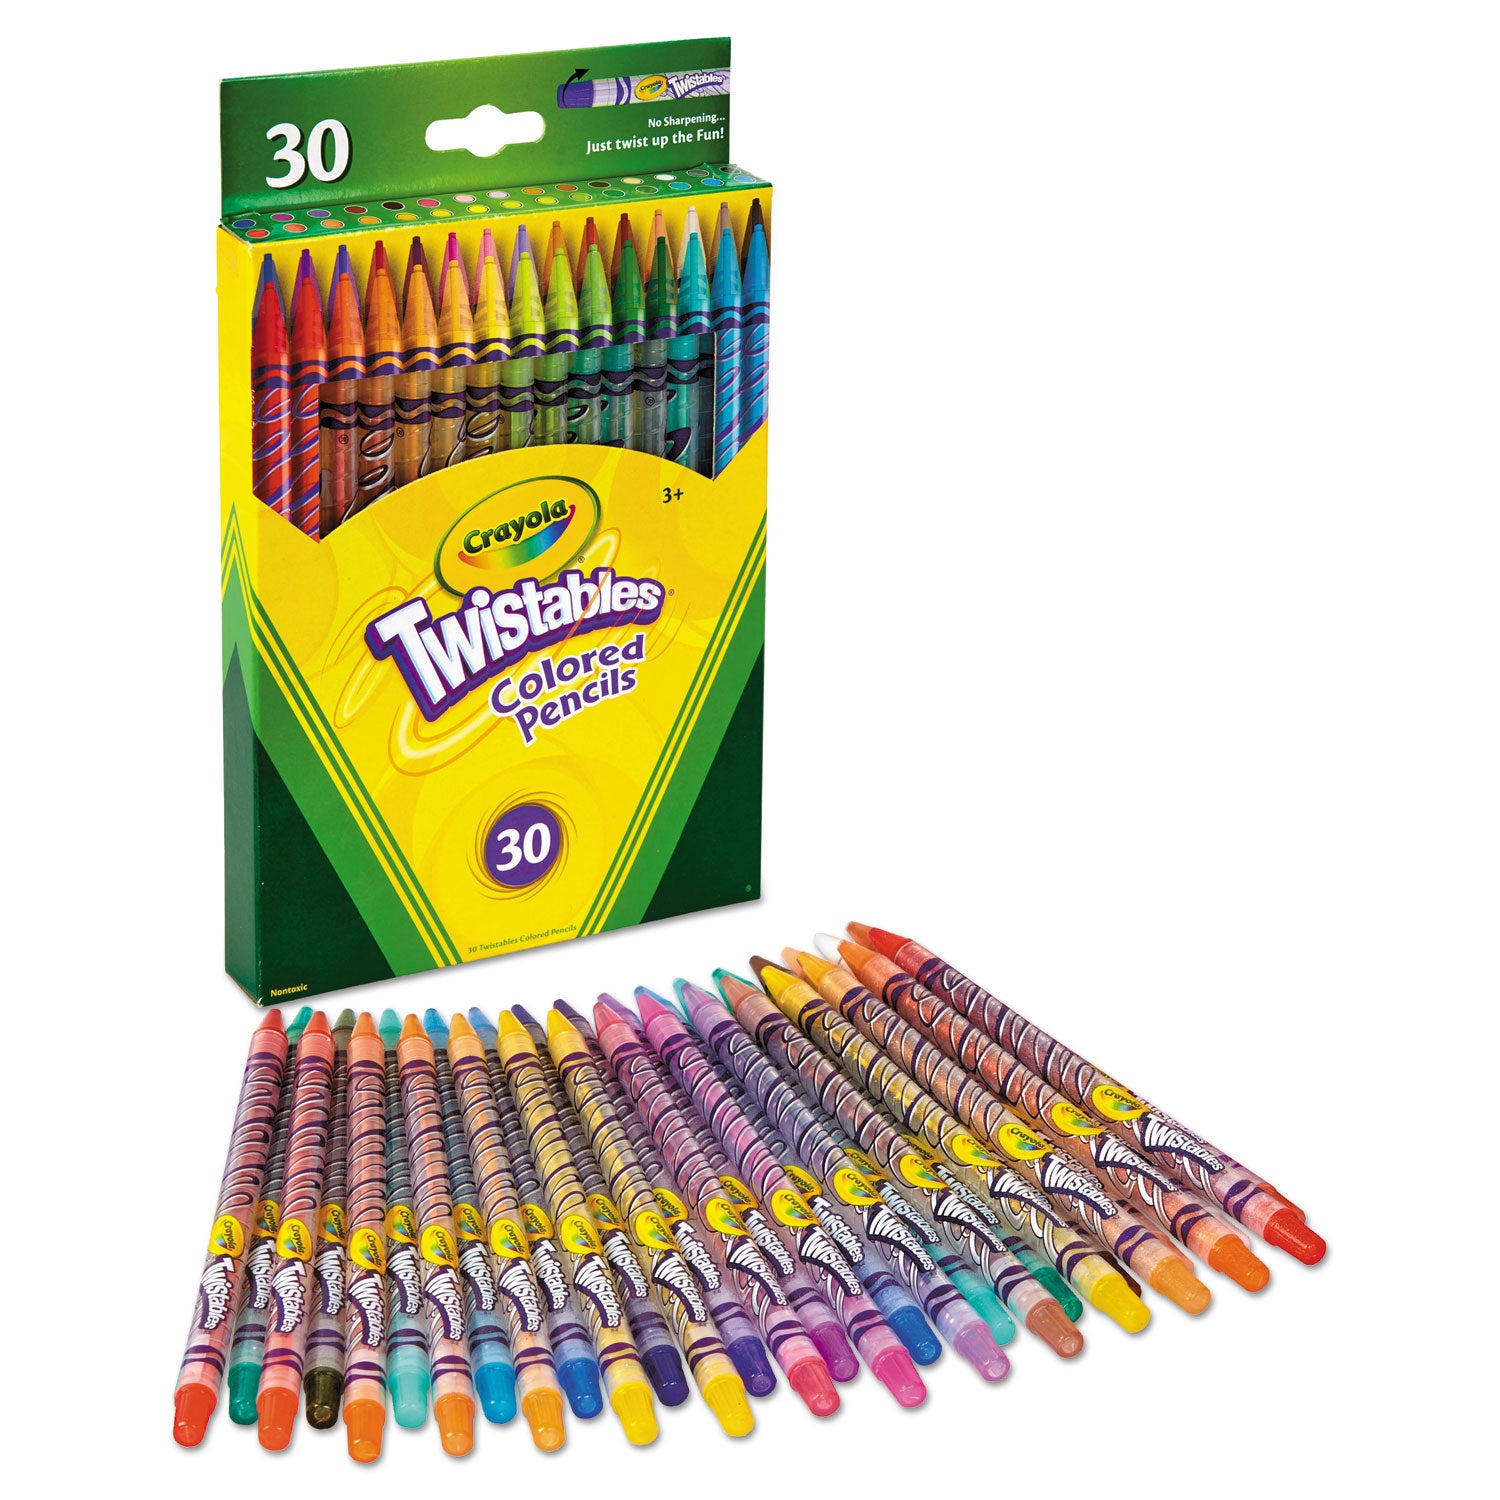 Twistables Colored Pencils, 2 mm, 2B, Assorted Lead and Barrel Colors, 30/Pack